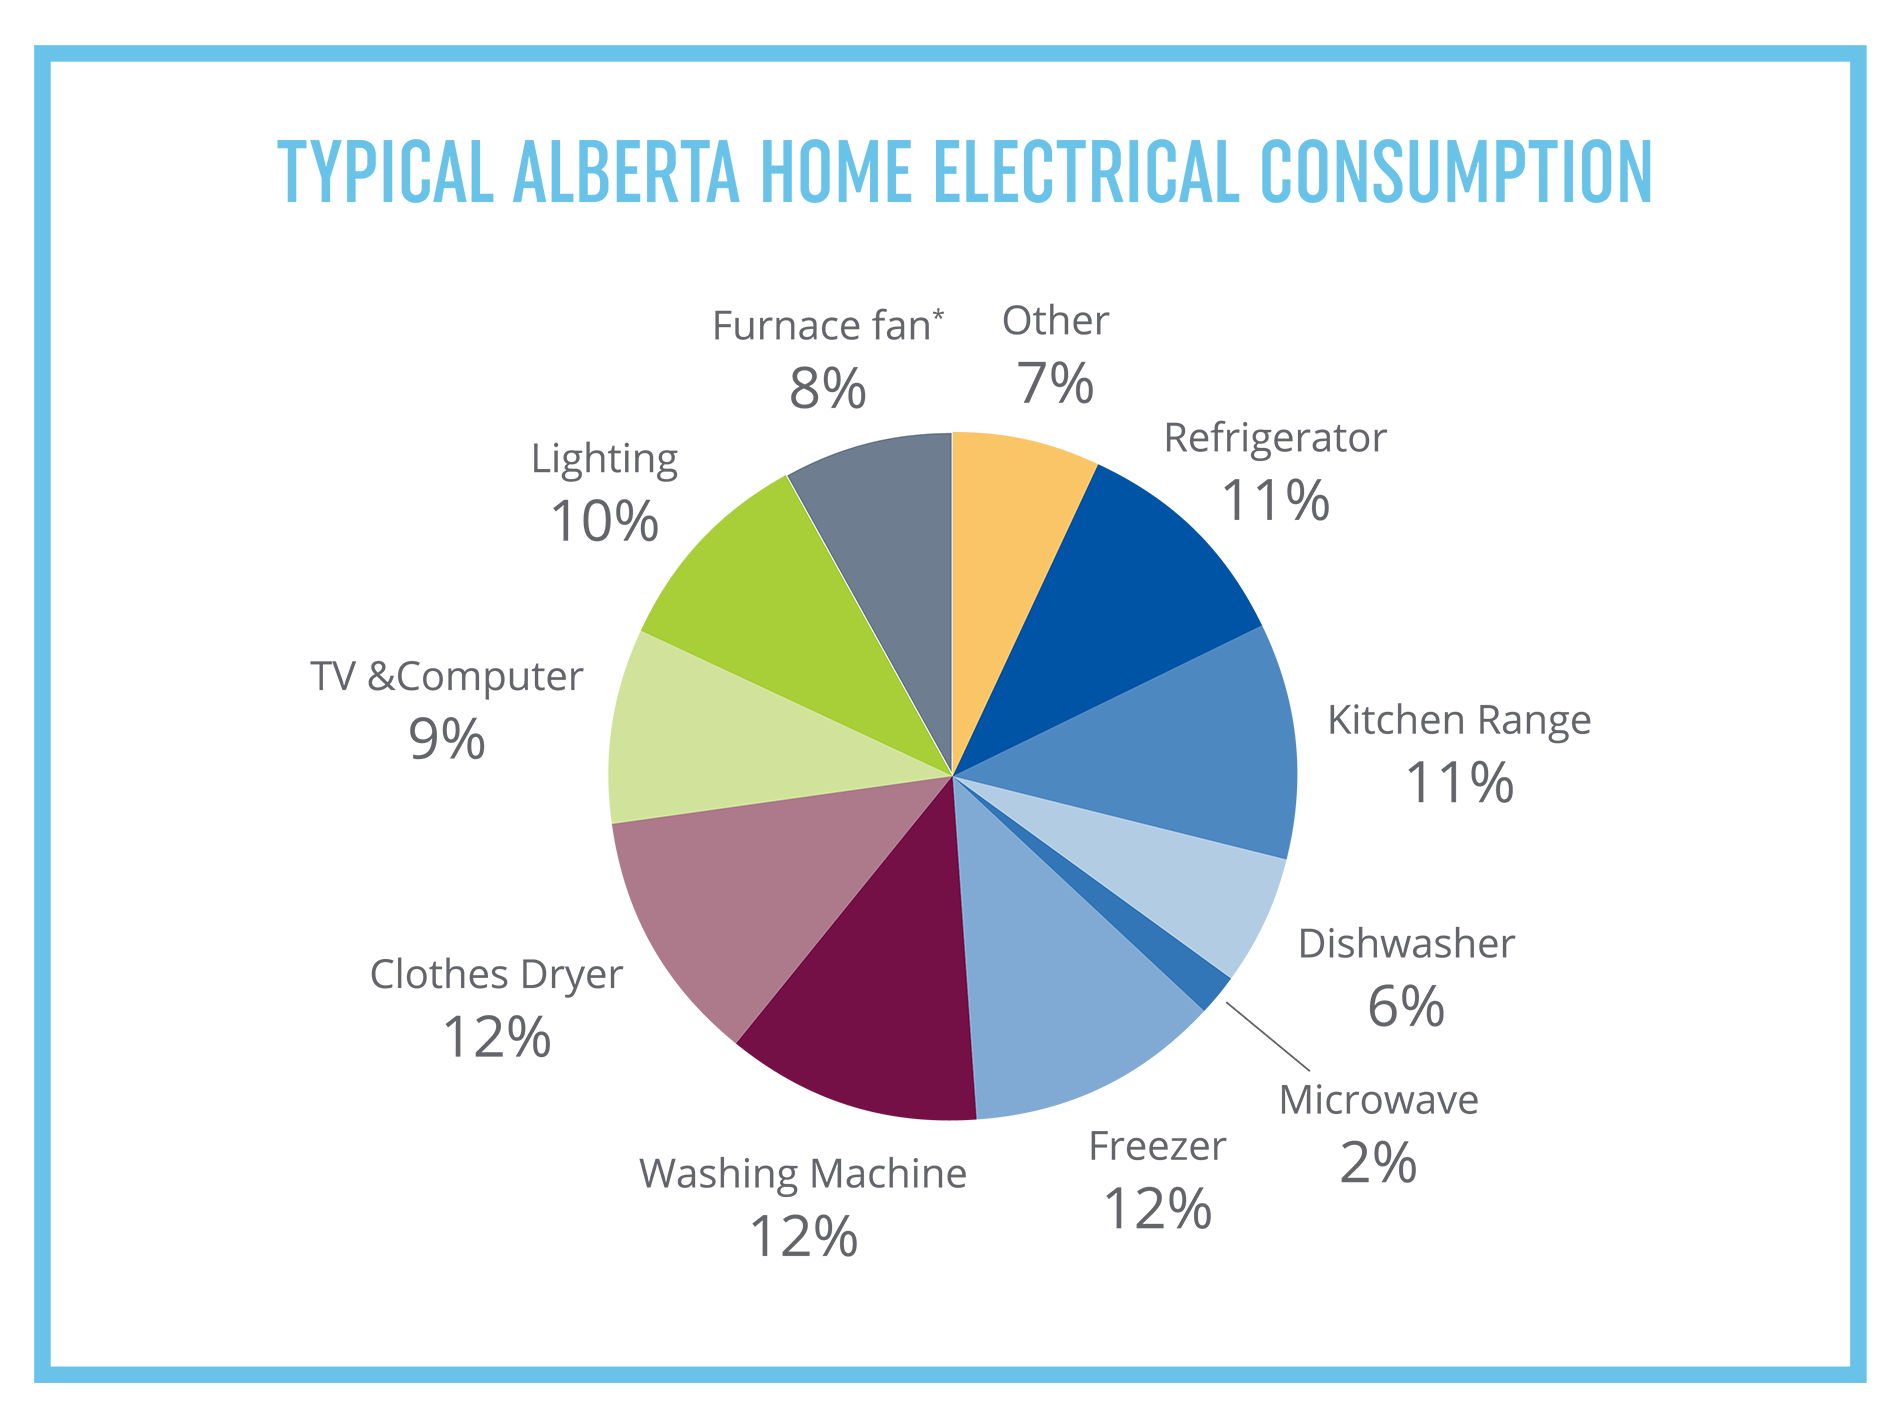 Typical Alberta home electrical consumption